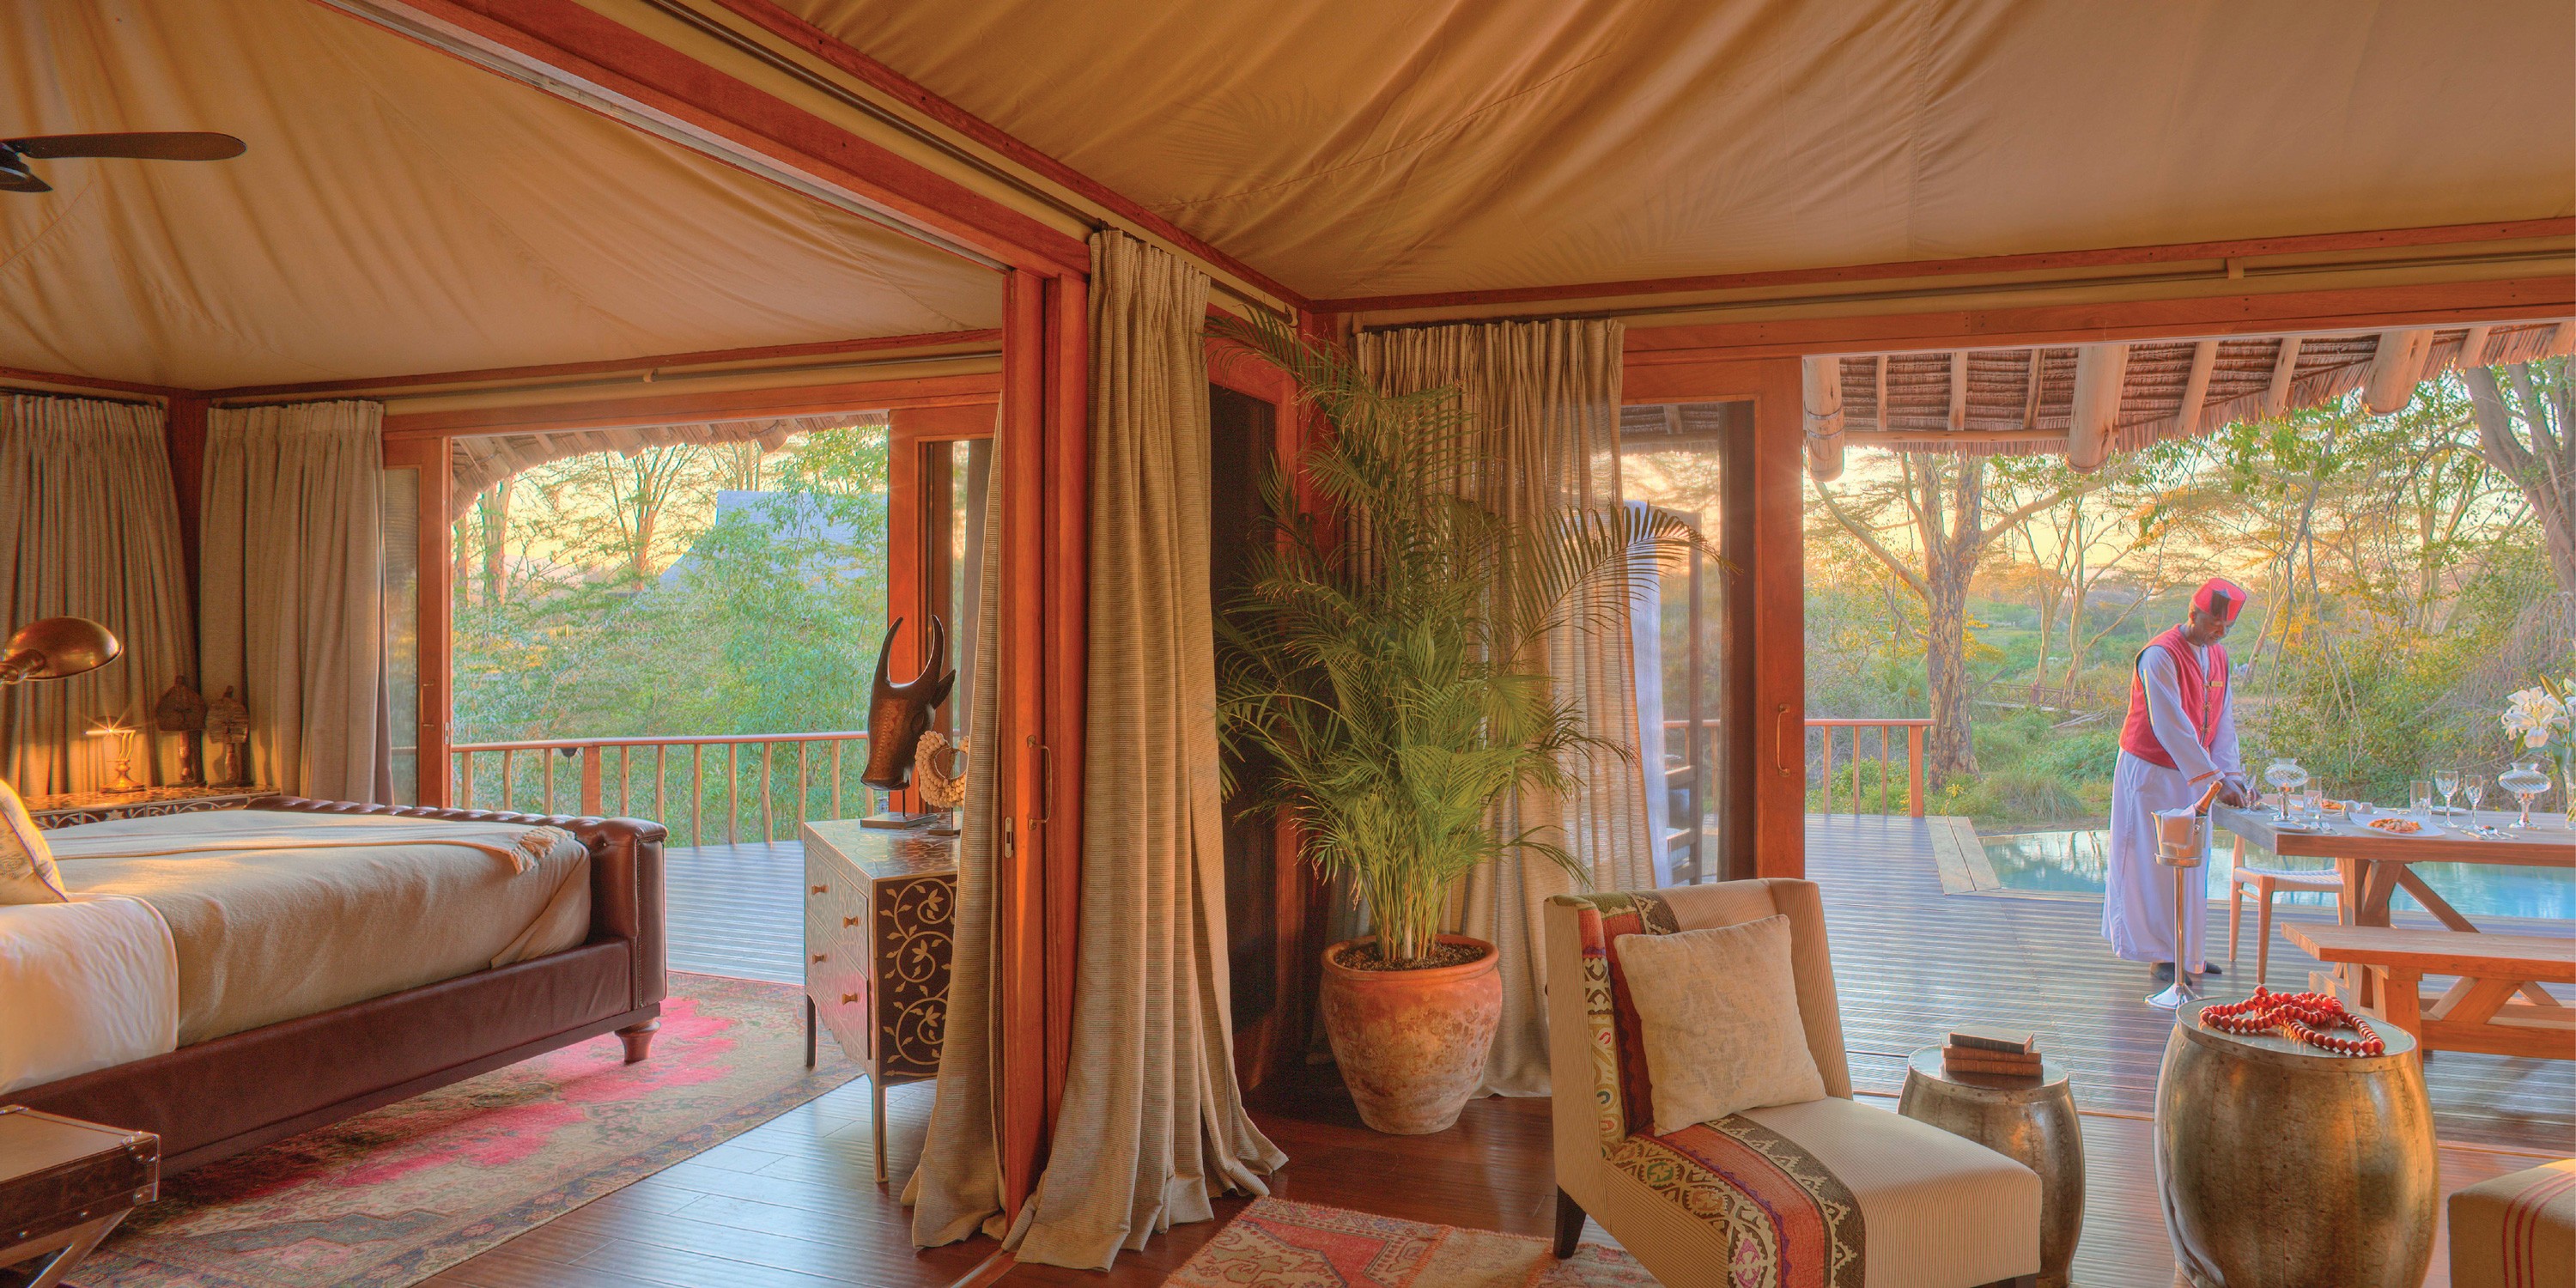 Finch Hattons Luxury Tented Camp | LinkedIn